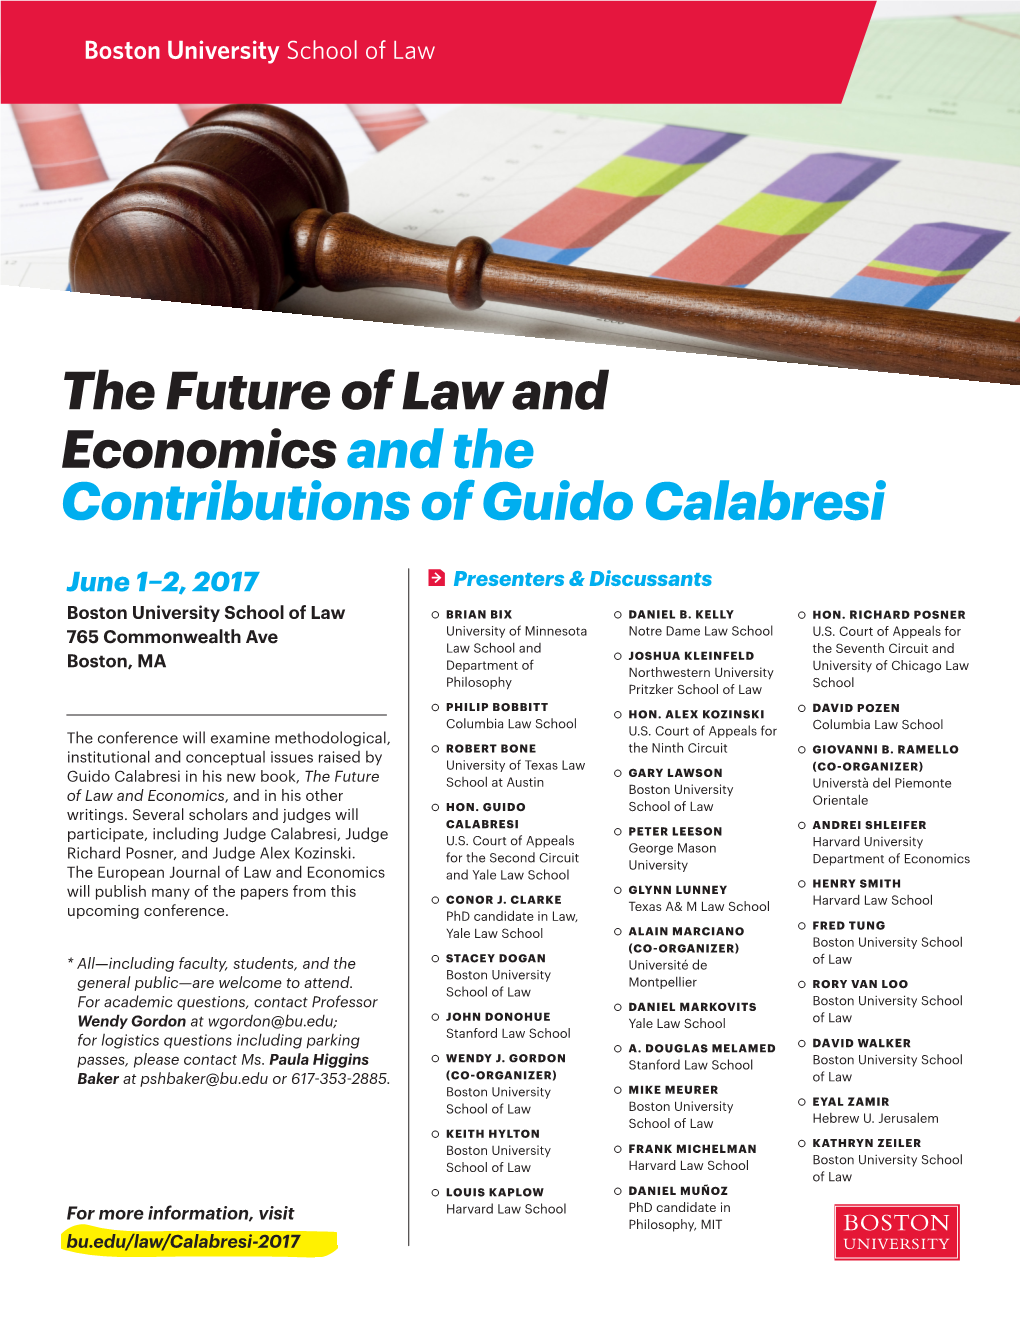 The Future of Law and Economics and the Contributions of Guido Calabresi